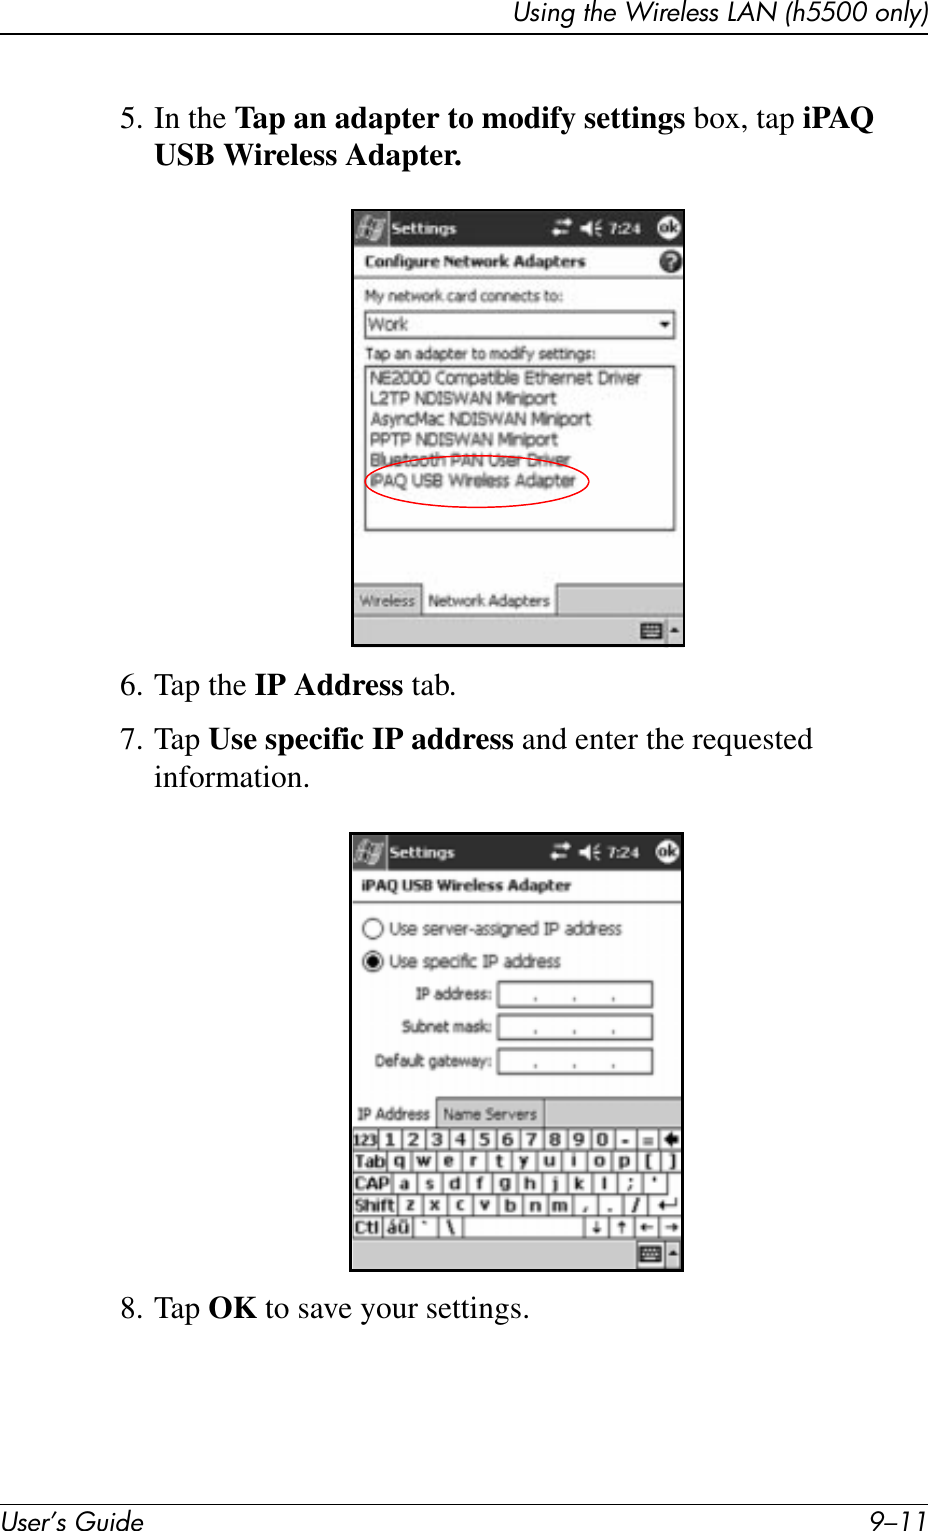 Using the Wireless LAN (h5500 only)User’s Guide 9–115. In the Tap an adapter to modify settings box, tap iPAQ USB Wireless Adapter.6. Tap the IP Address tab.7. Tap Use specific IP address and enter the requested information.8. Tap OK to save your settings.